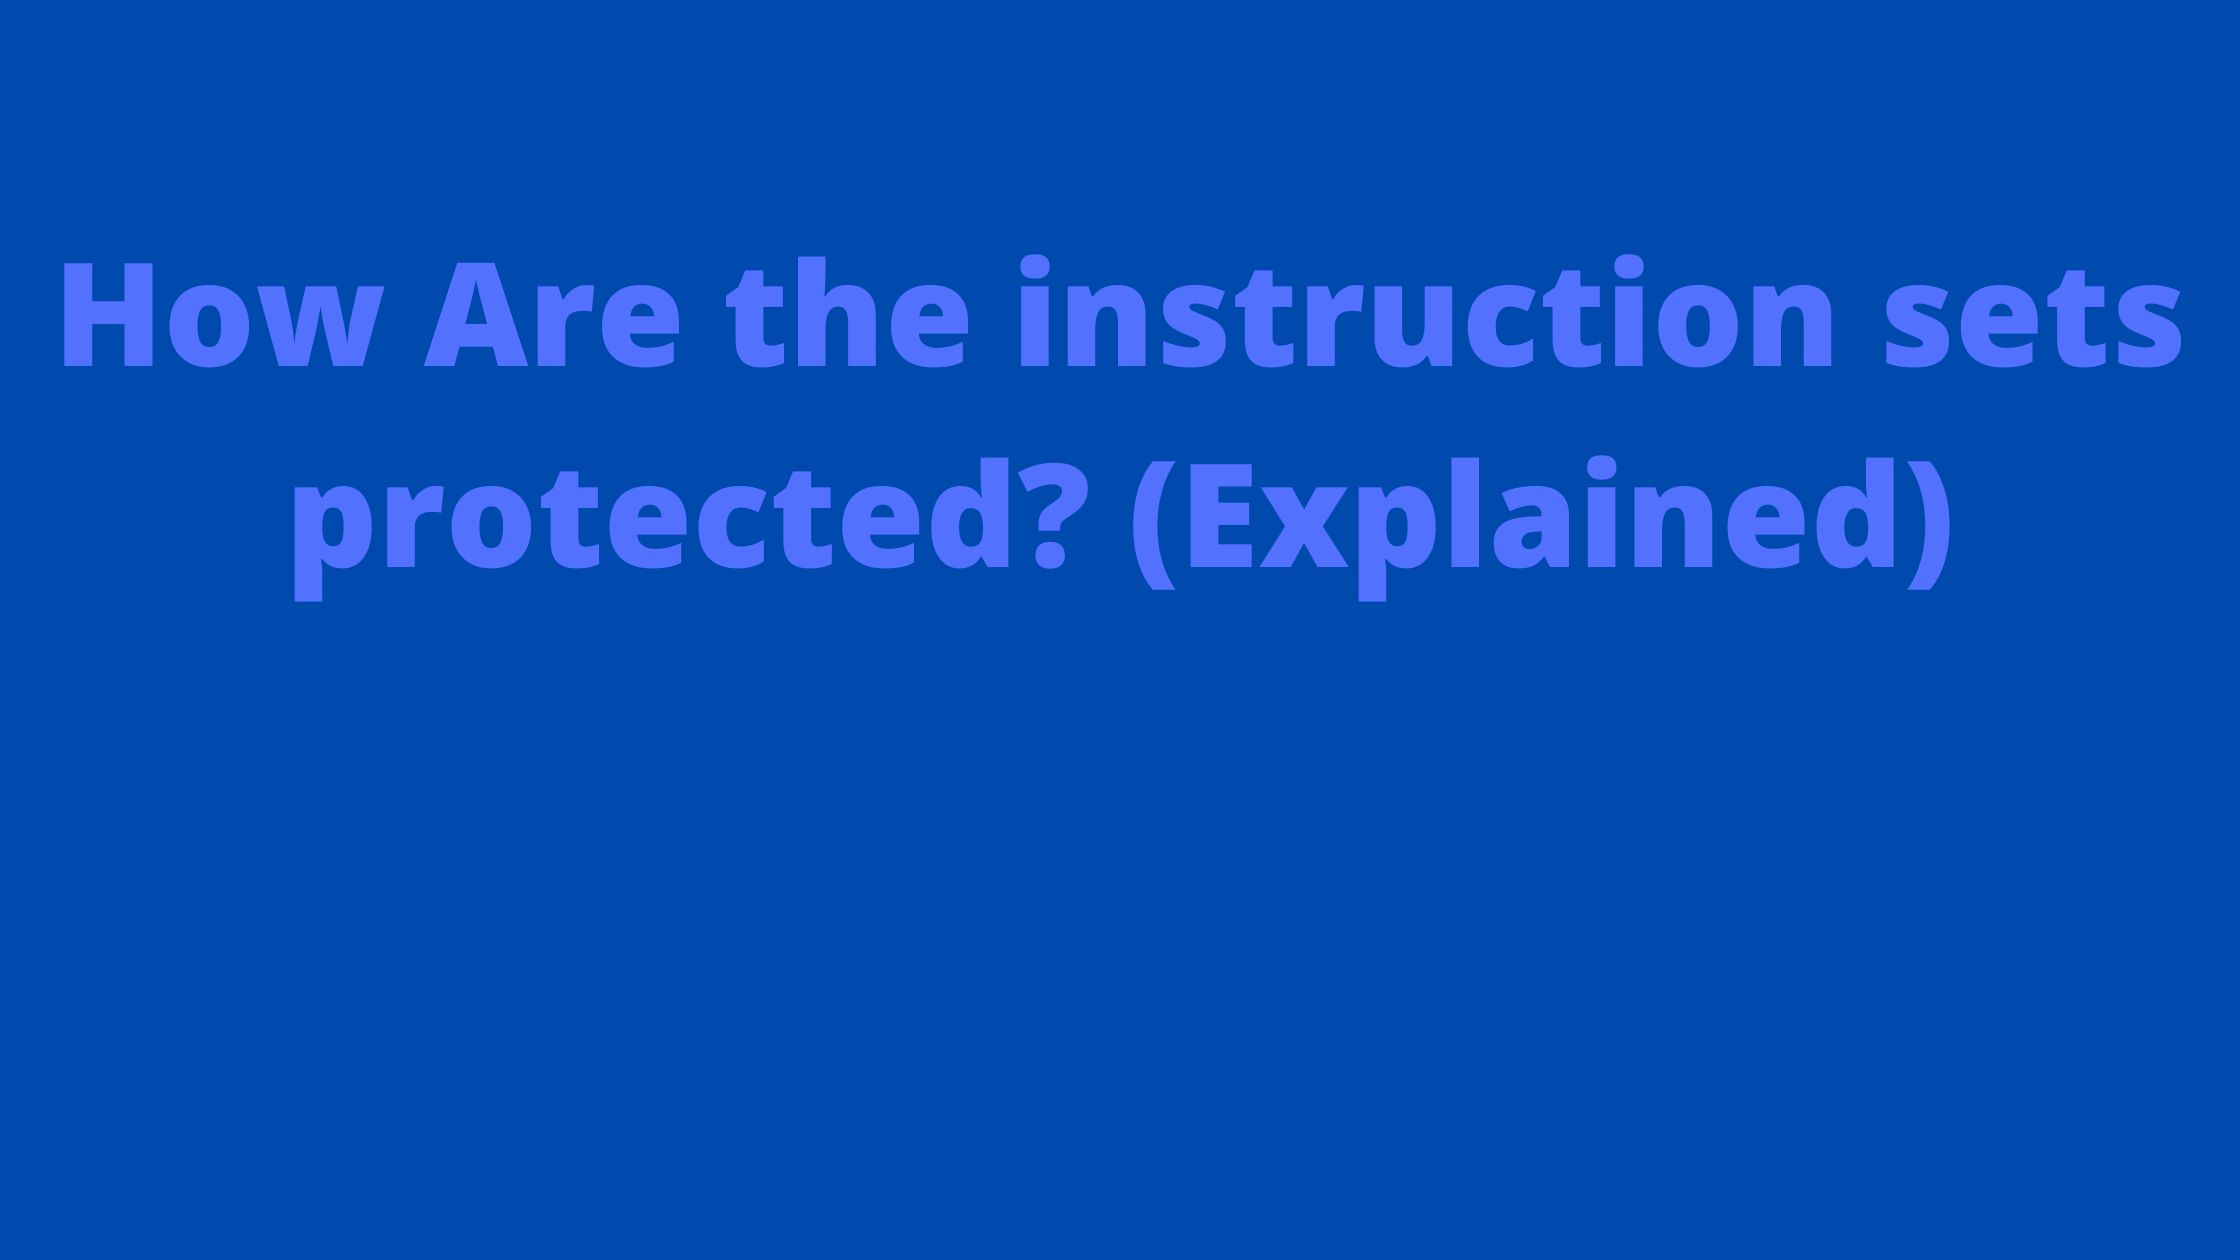 How Are the instruction sets protected? (Explained)